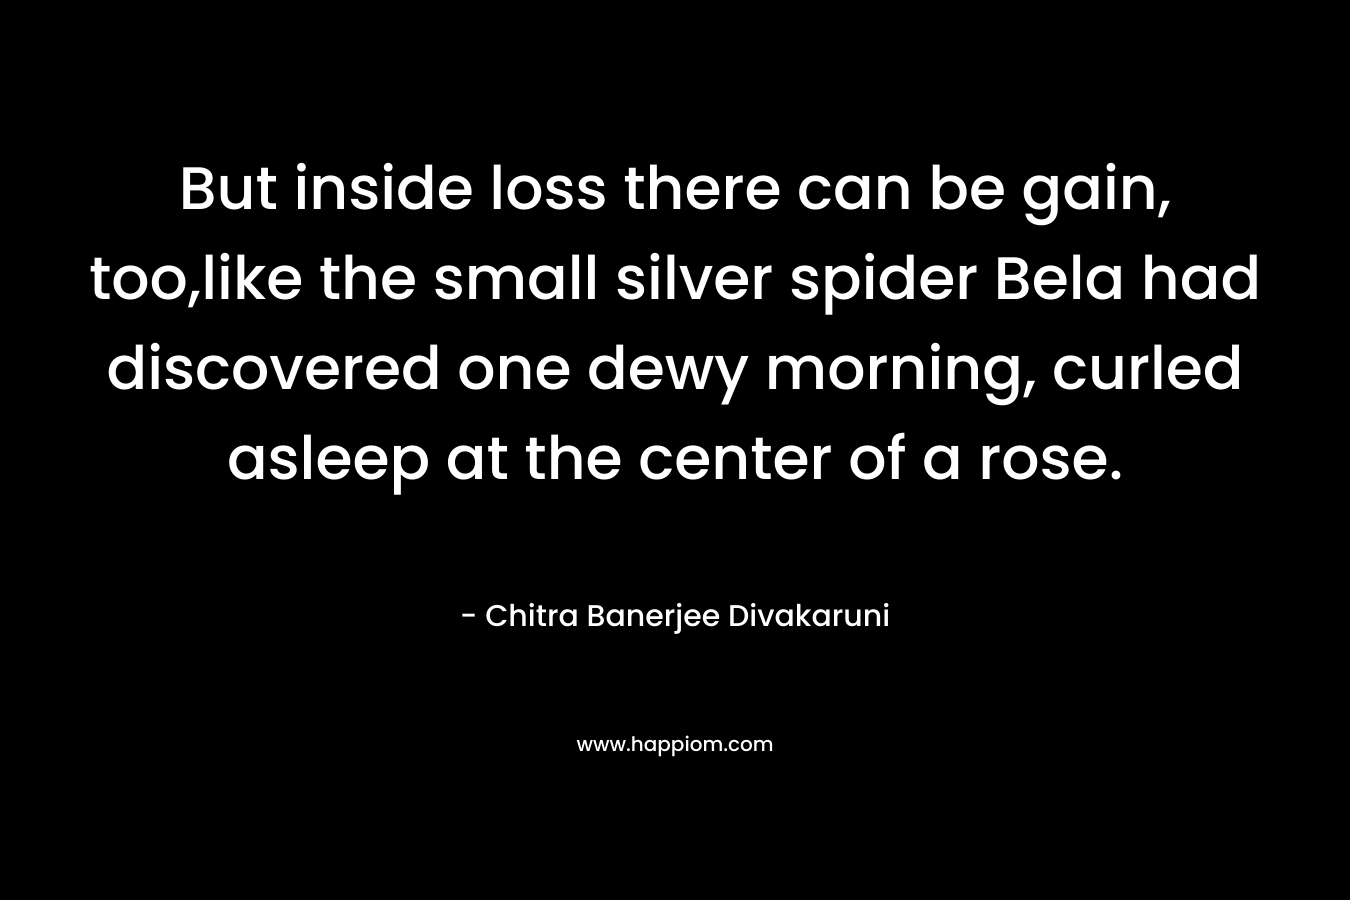 But inside loss there can be gain, too,like the small silver spider Bela had discovered one dewy morning, curled asleep at the center of a rose.